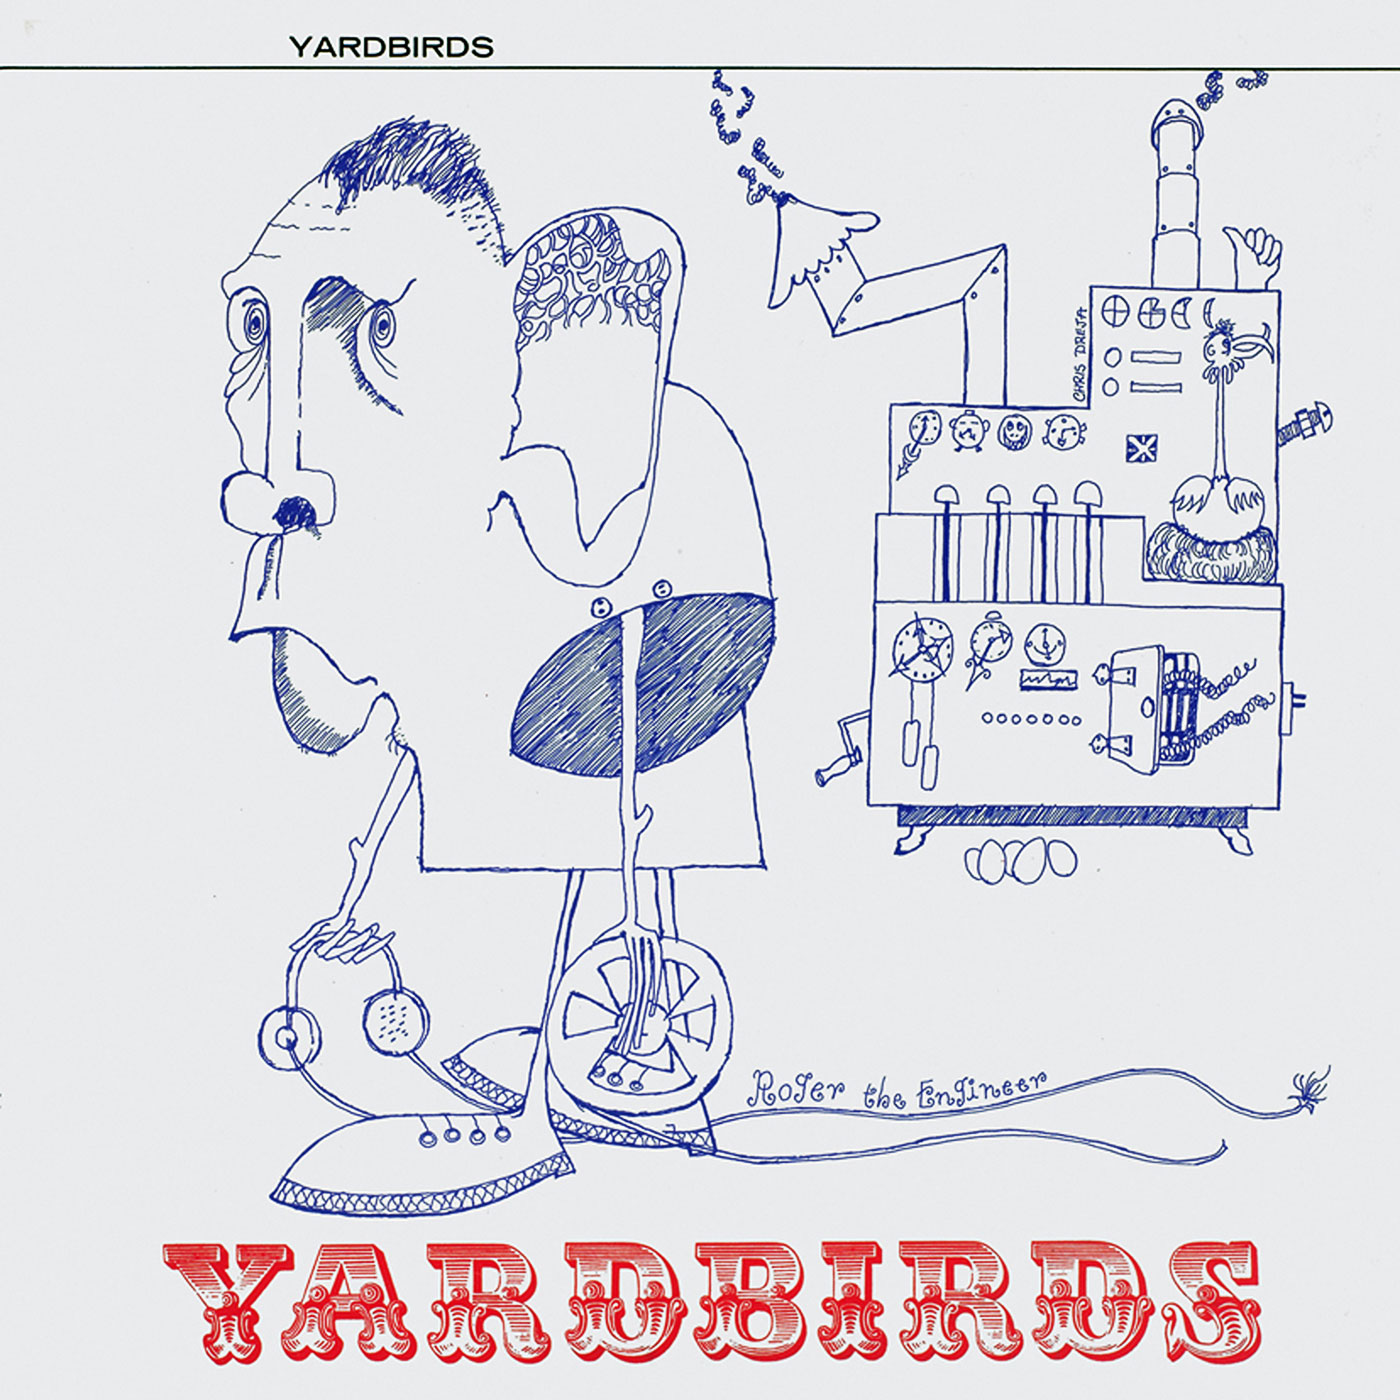 Album Cover for The Yardbirds' Roger the Engineer